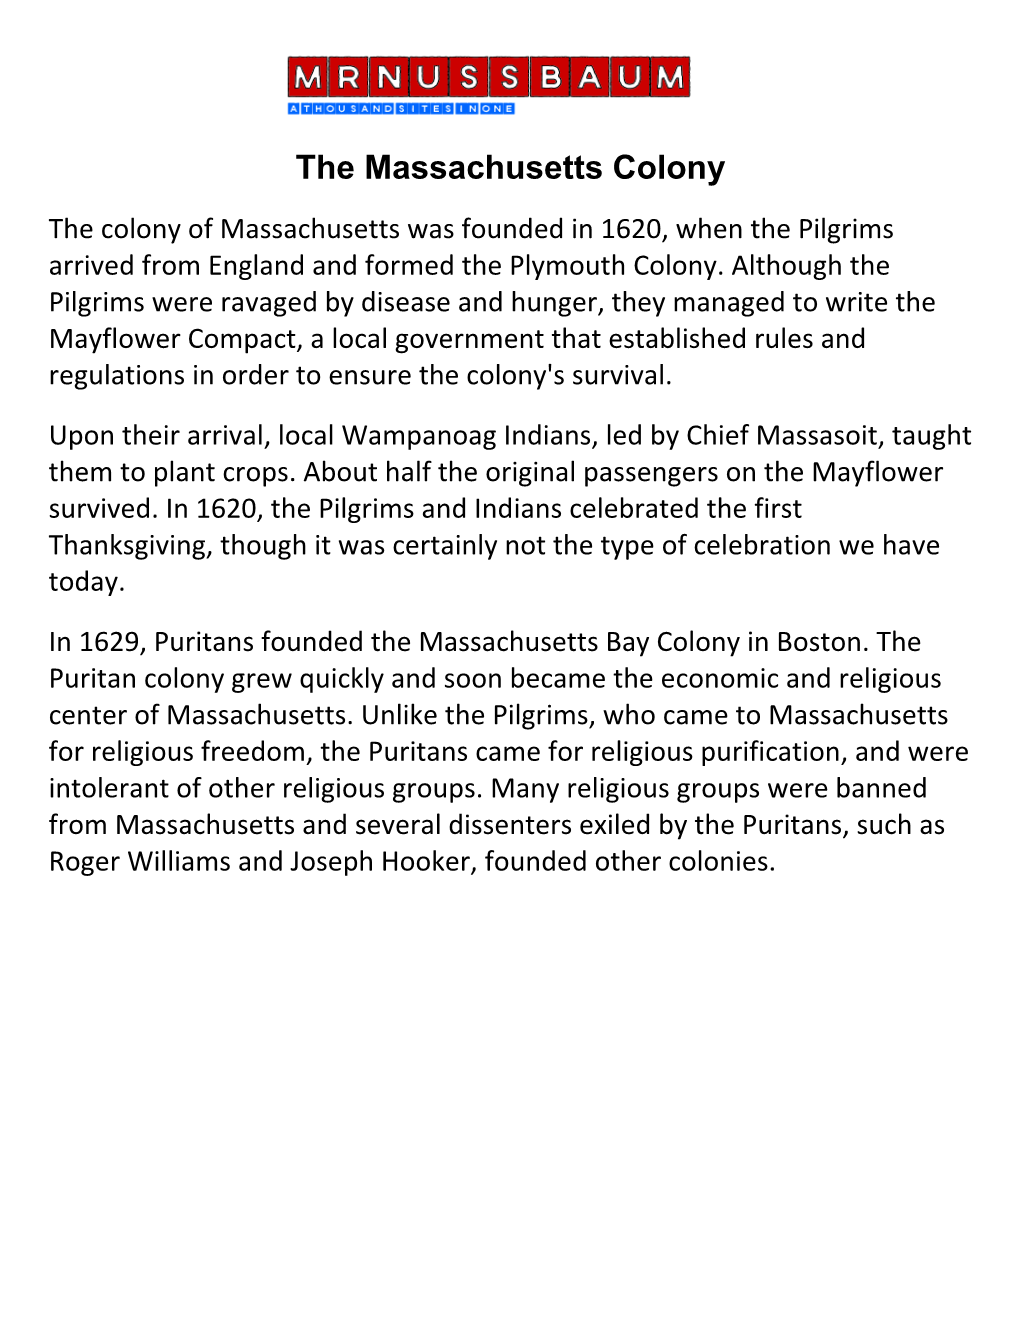 The Massachusetts Colony the Colony of Massachusetts Was Founded in 1620, When the Pilgrims Arrived from England and Formed the Plymouth Colony